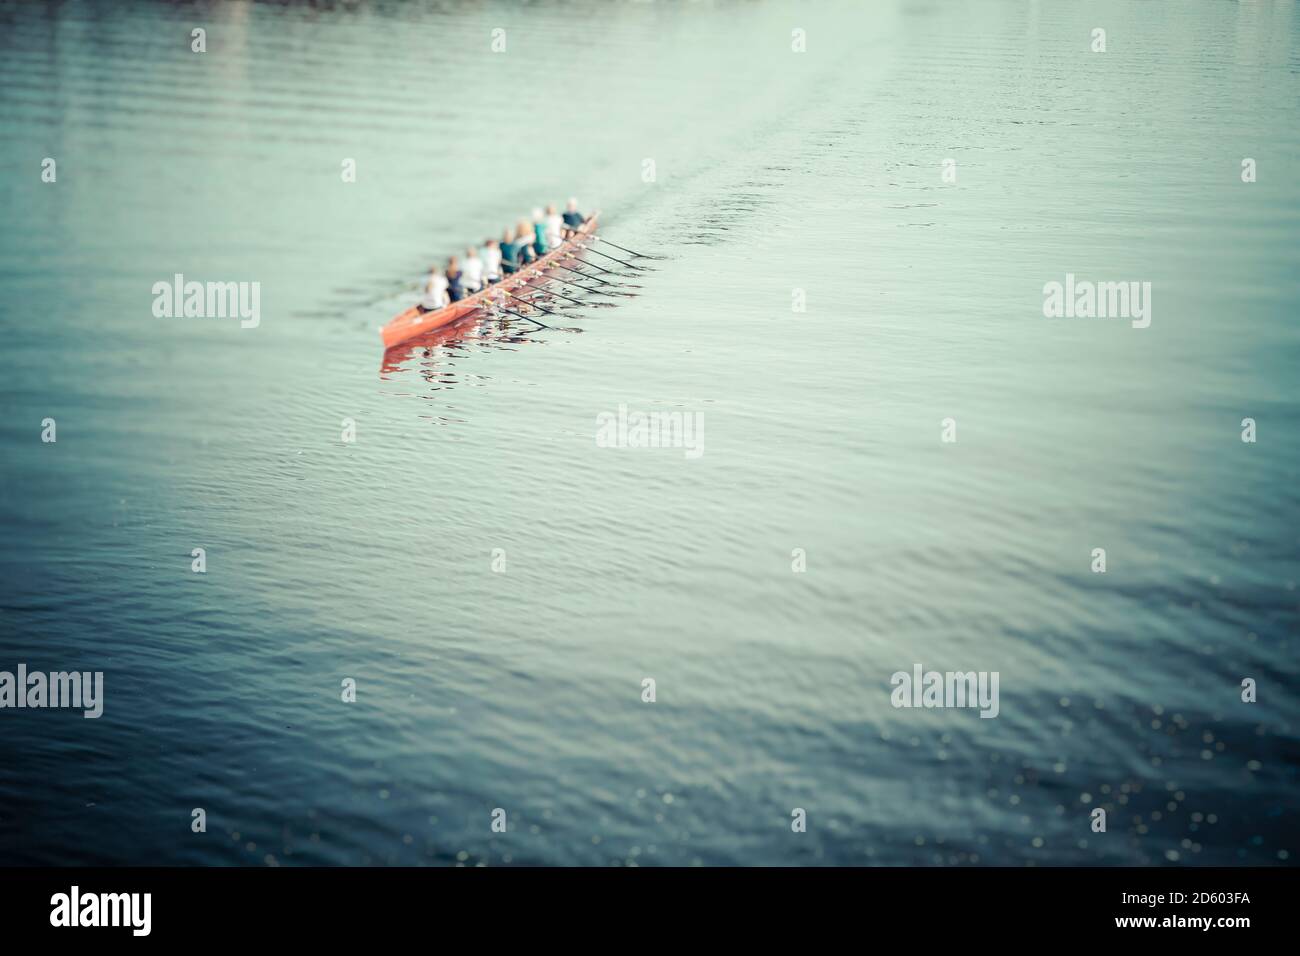 Germany, Hamburg, Rowing boat on Alster river Stock Photo